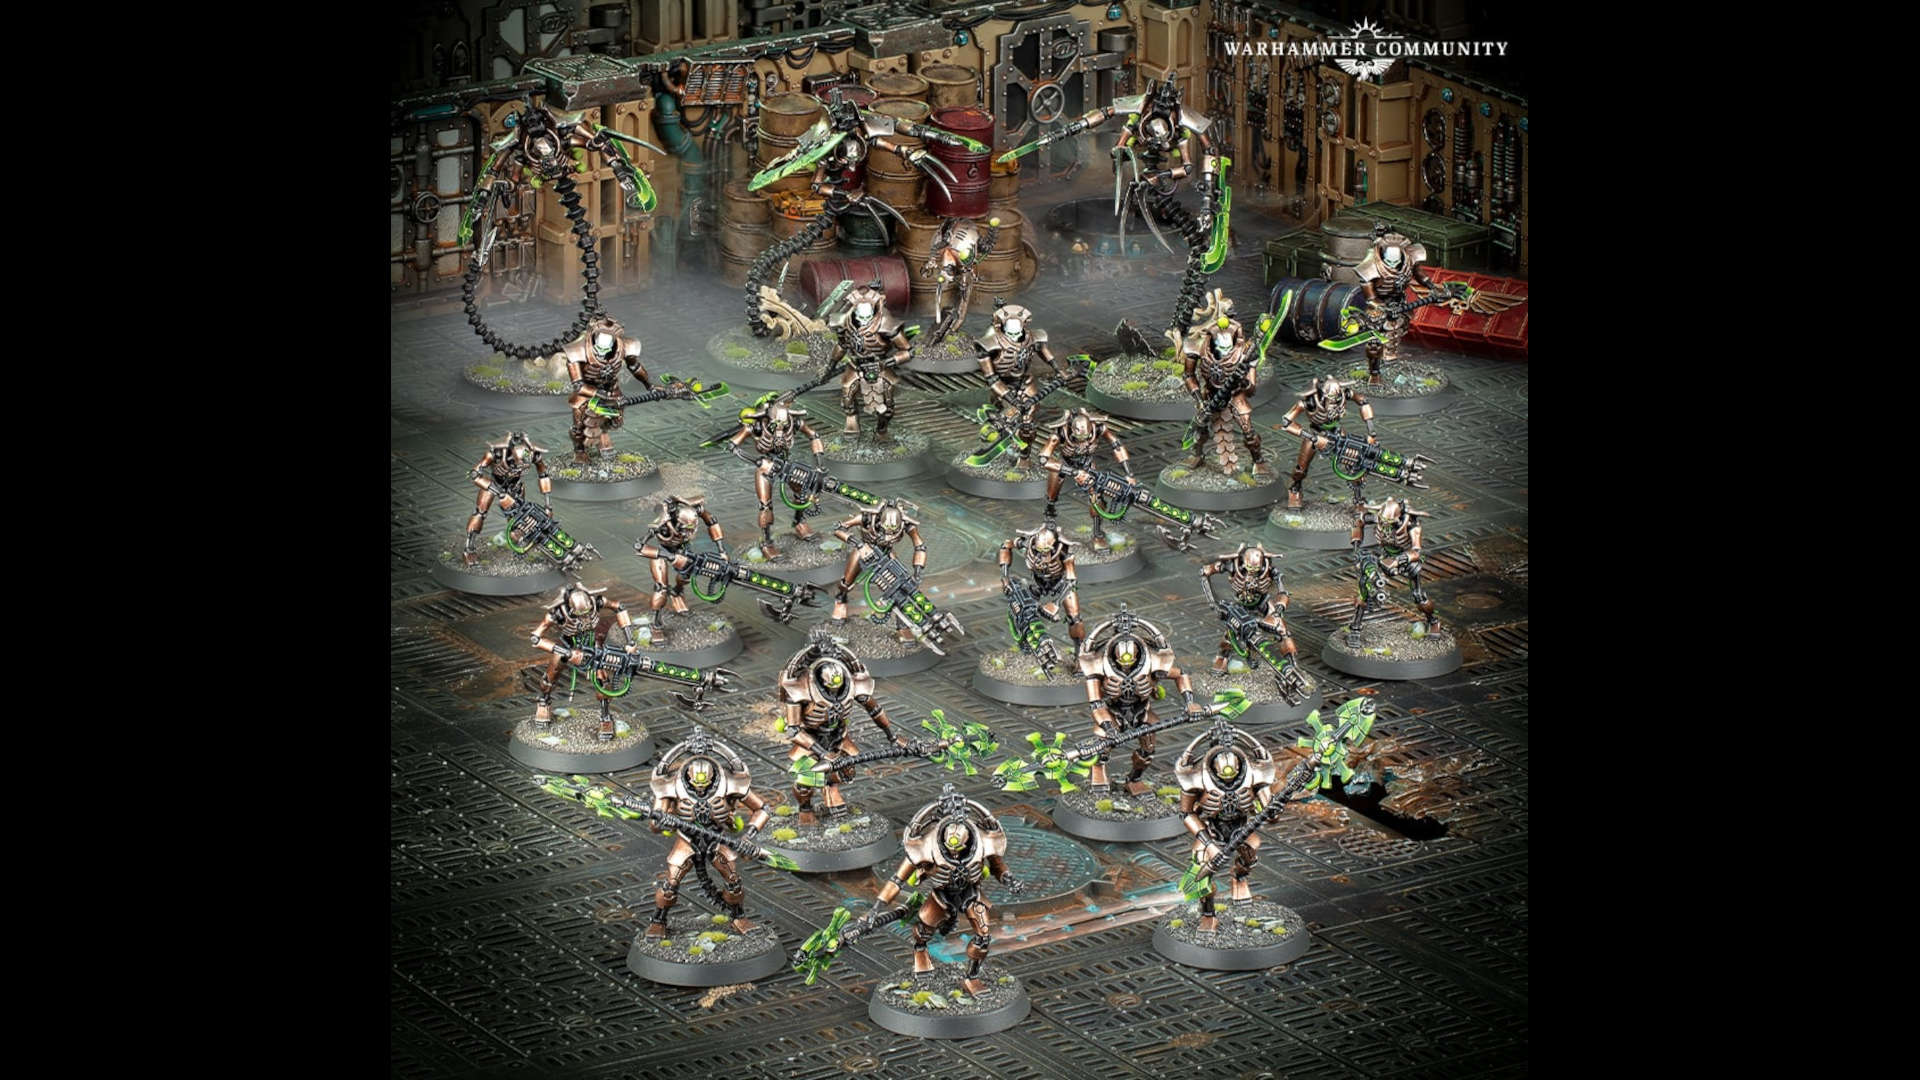 Warhammer 40k Necrons boarding patrol - a force of brassy automata with fluorescent green weapons advance into a space ship - models and photographs by Games Workshop